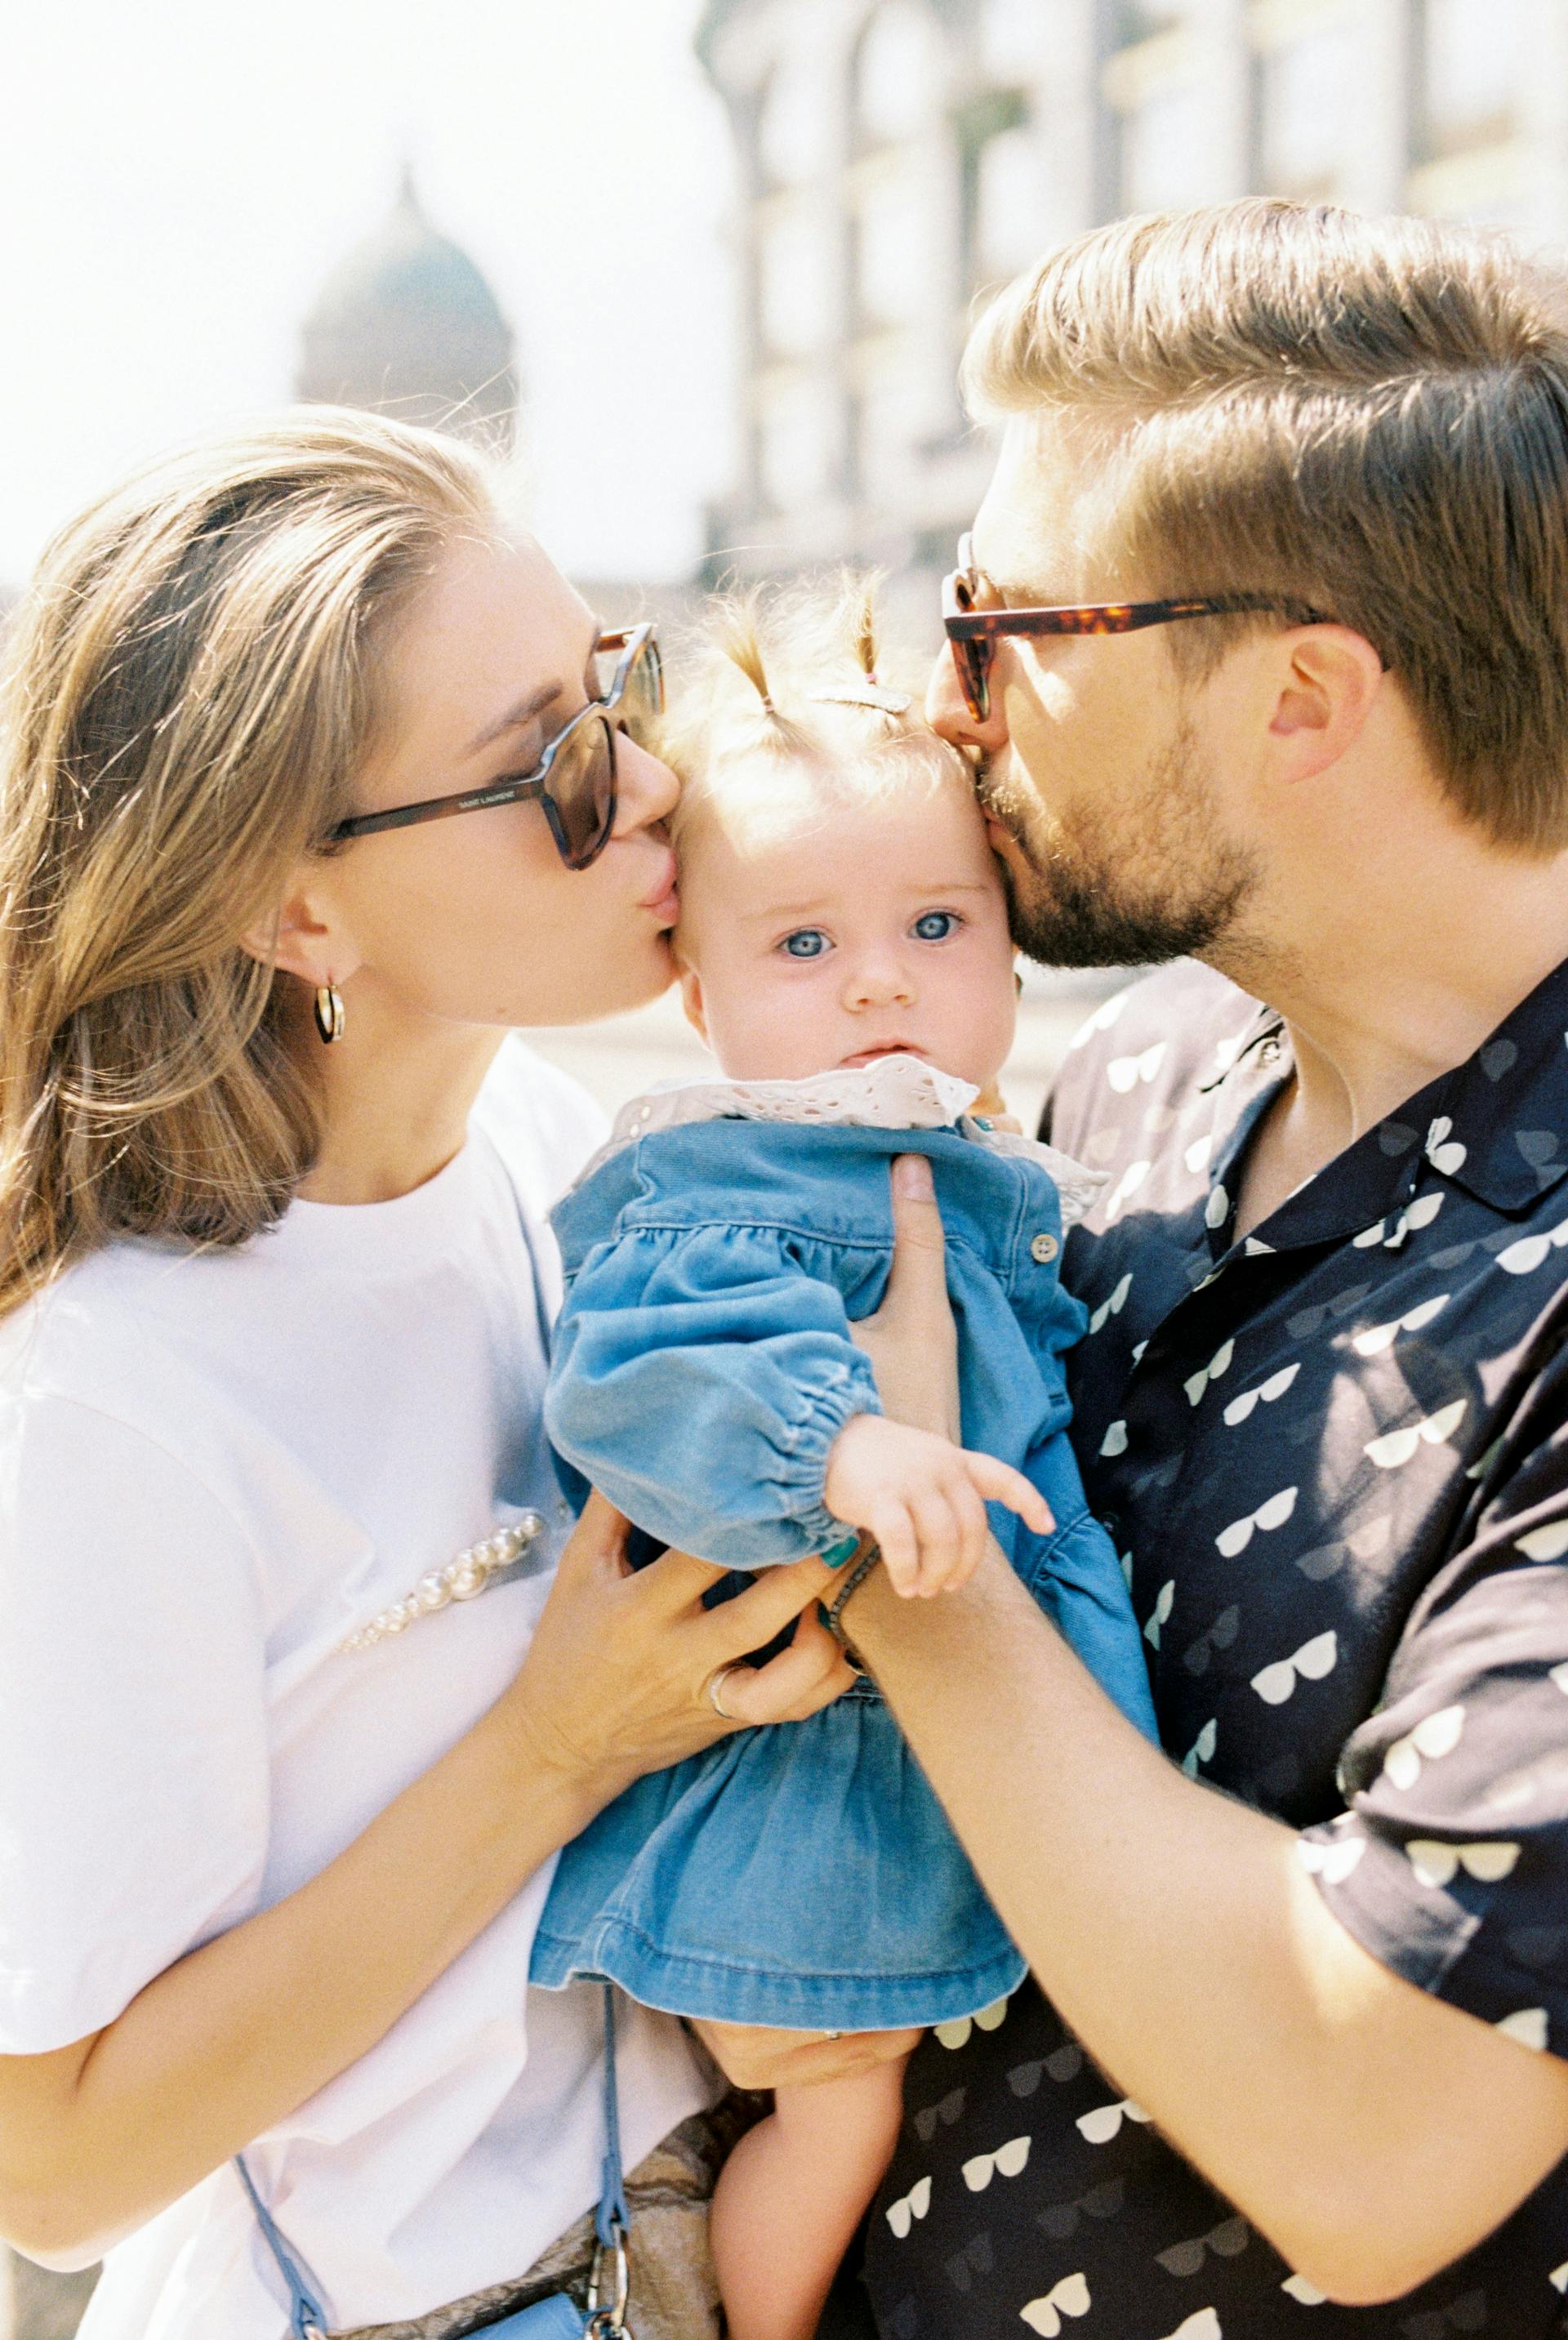 A set of parents with their baby girl | Source: Pexels